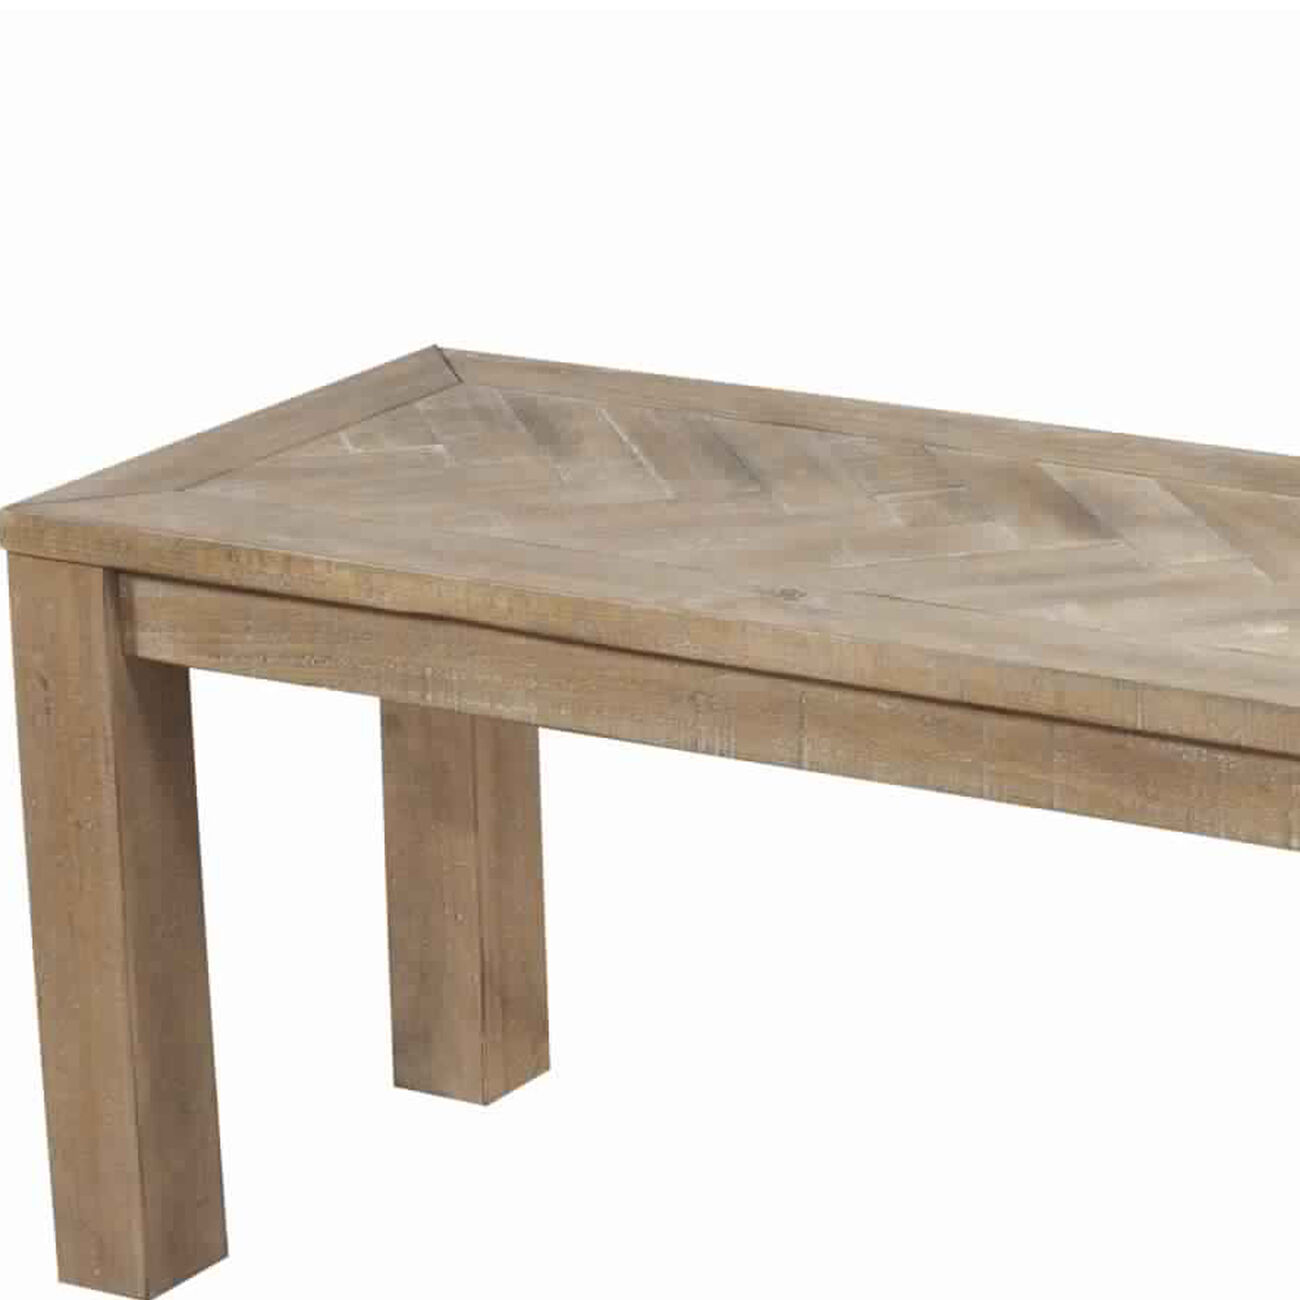 Rectangular Wooden Dining Bench with Block Legs, Weathered Brown